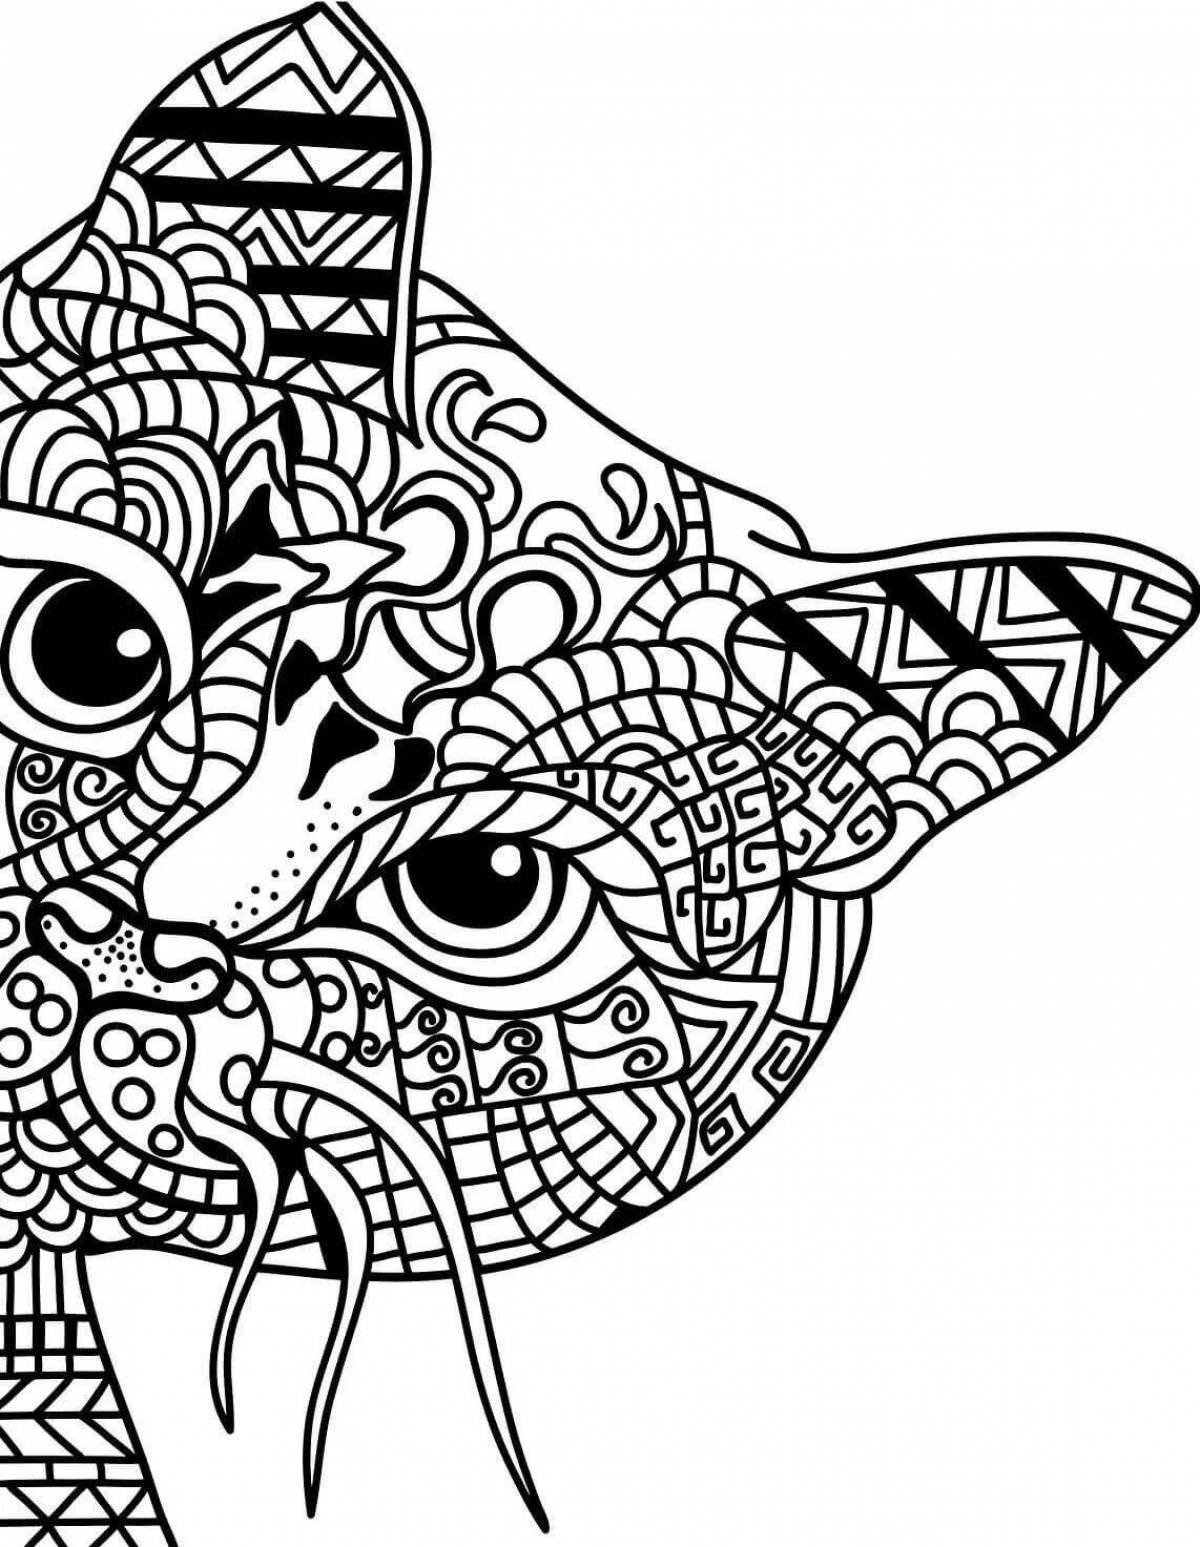 Playful anti-stress cat coloring book for girls